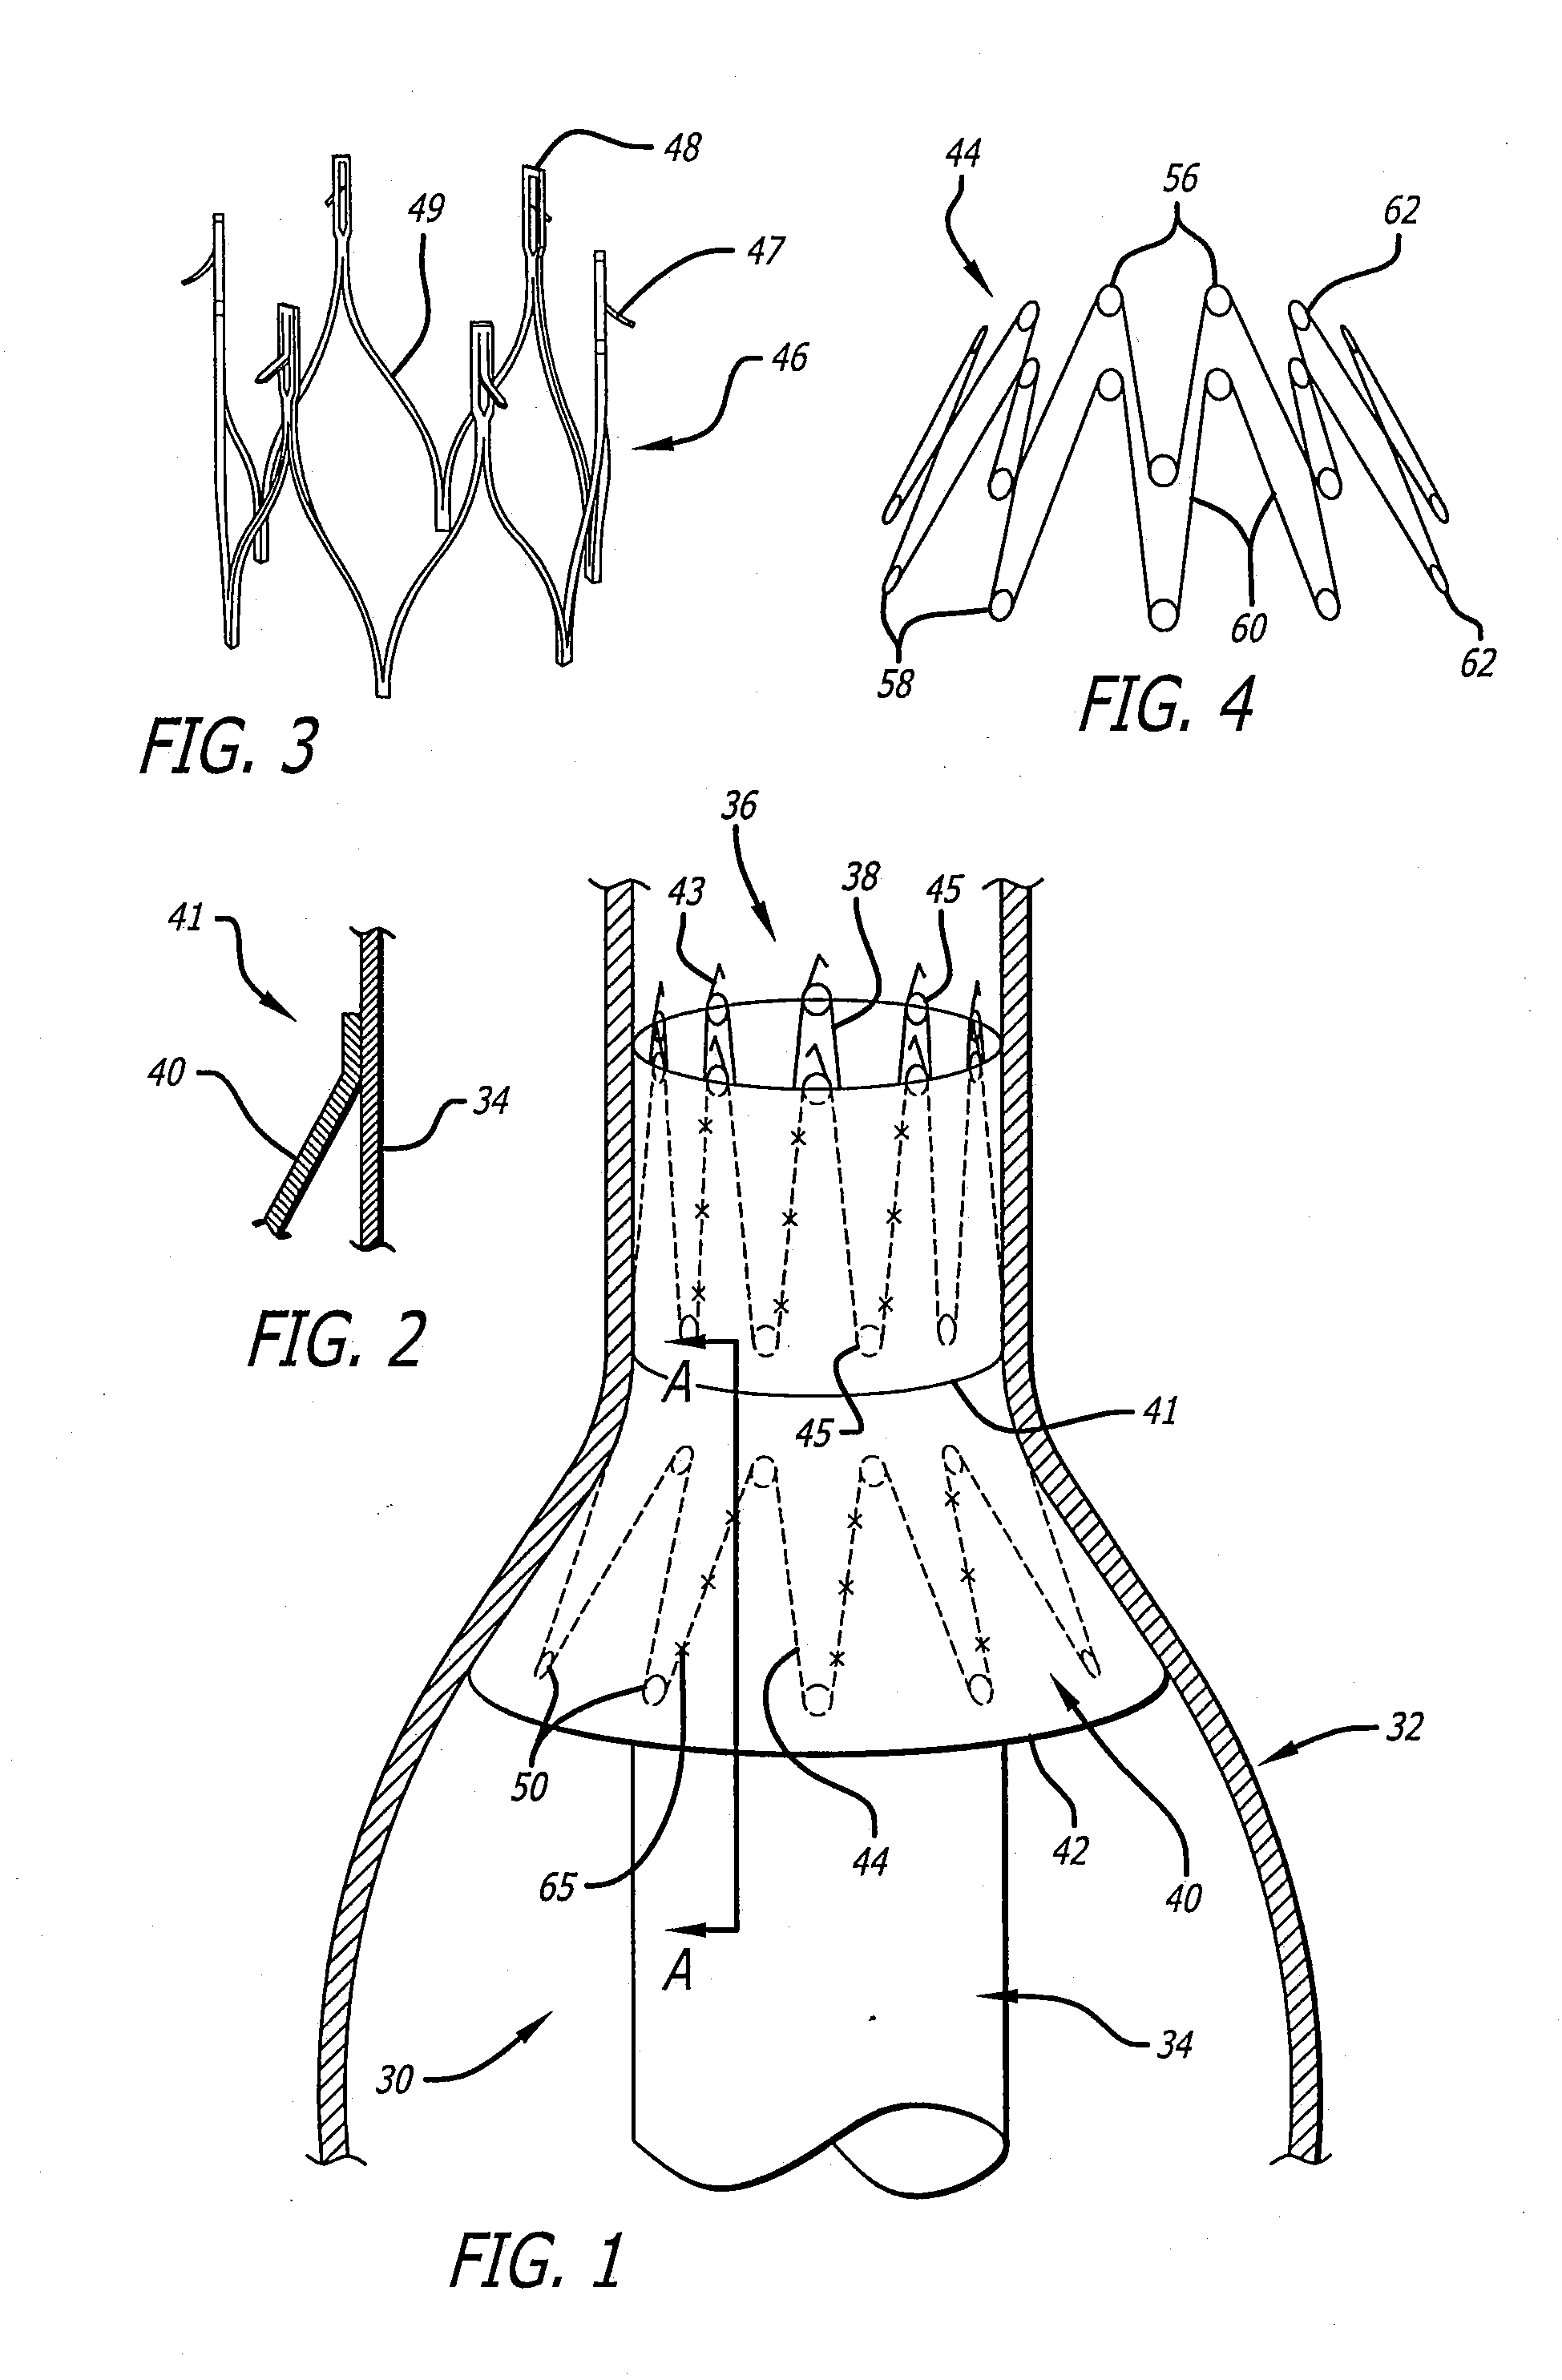 Endovascular graft for providing a seal with vasculature